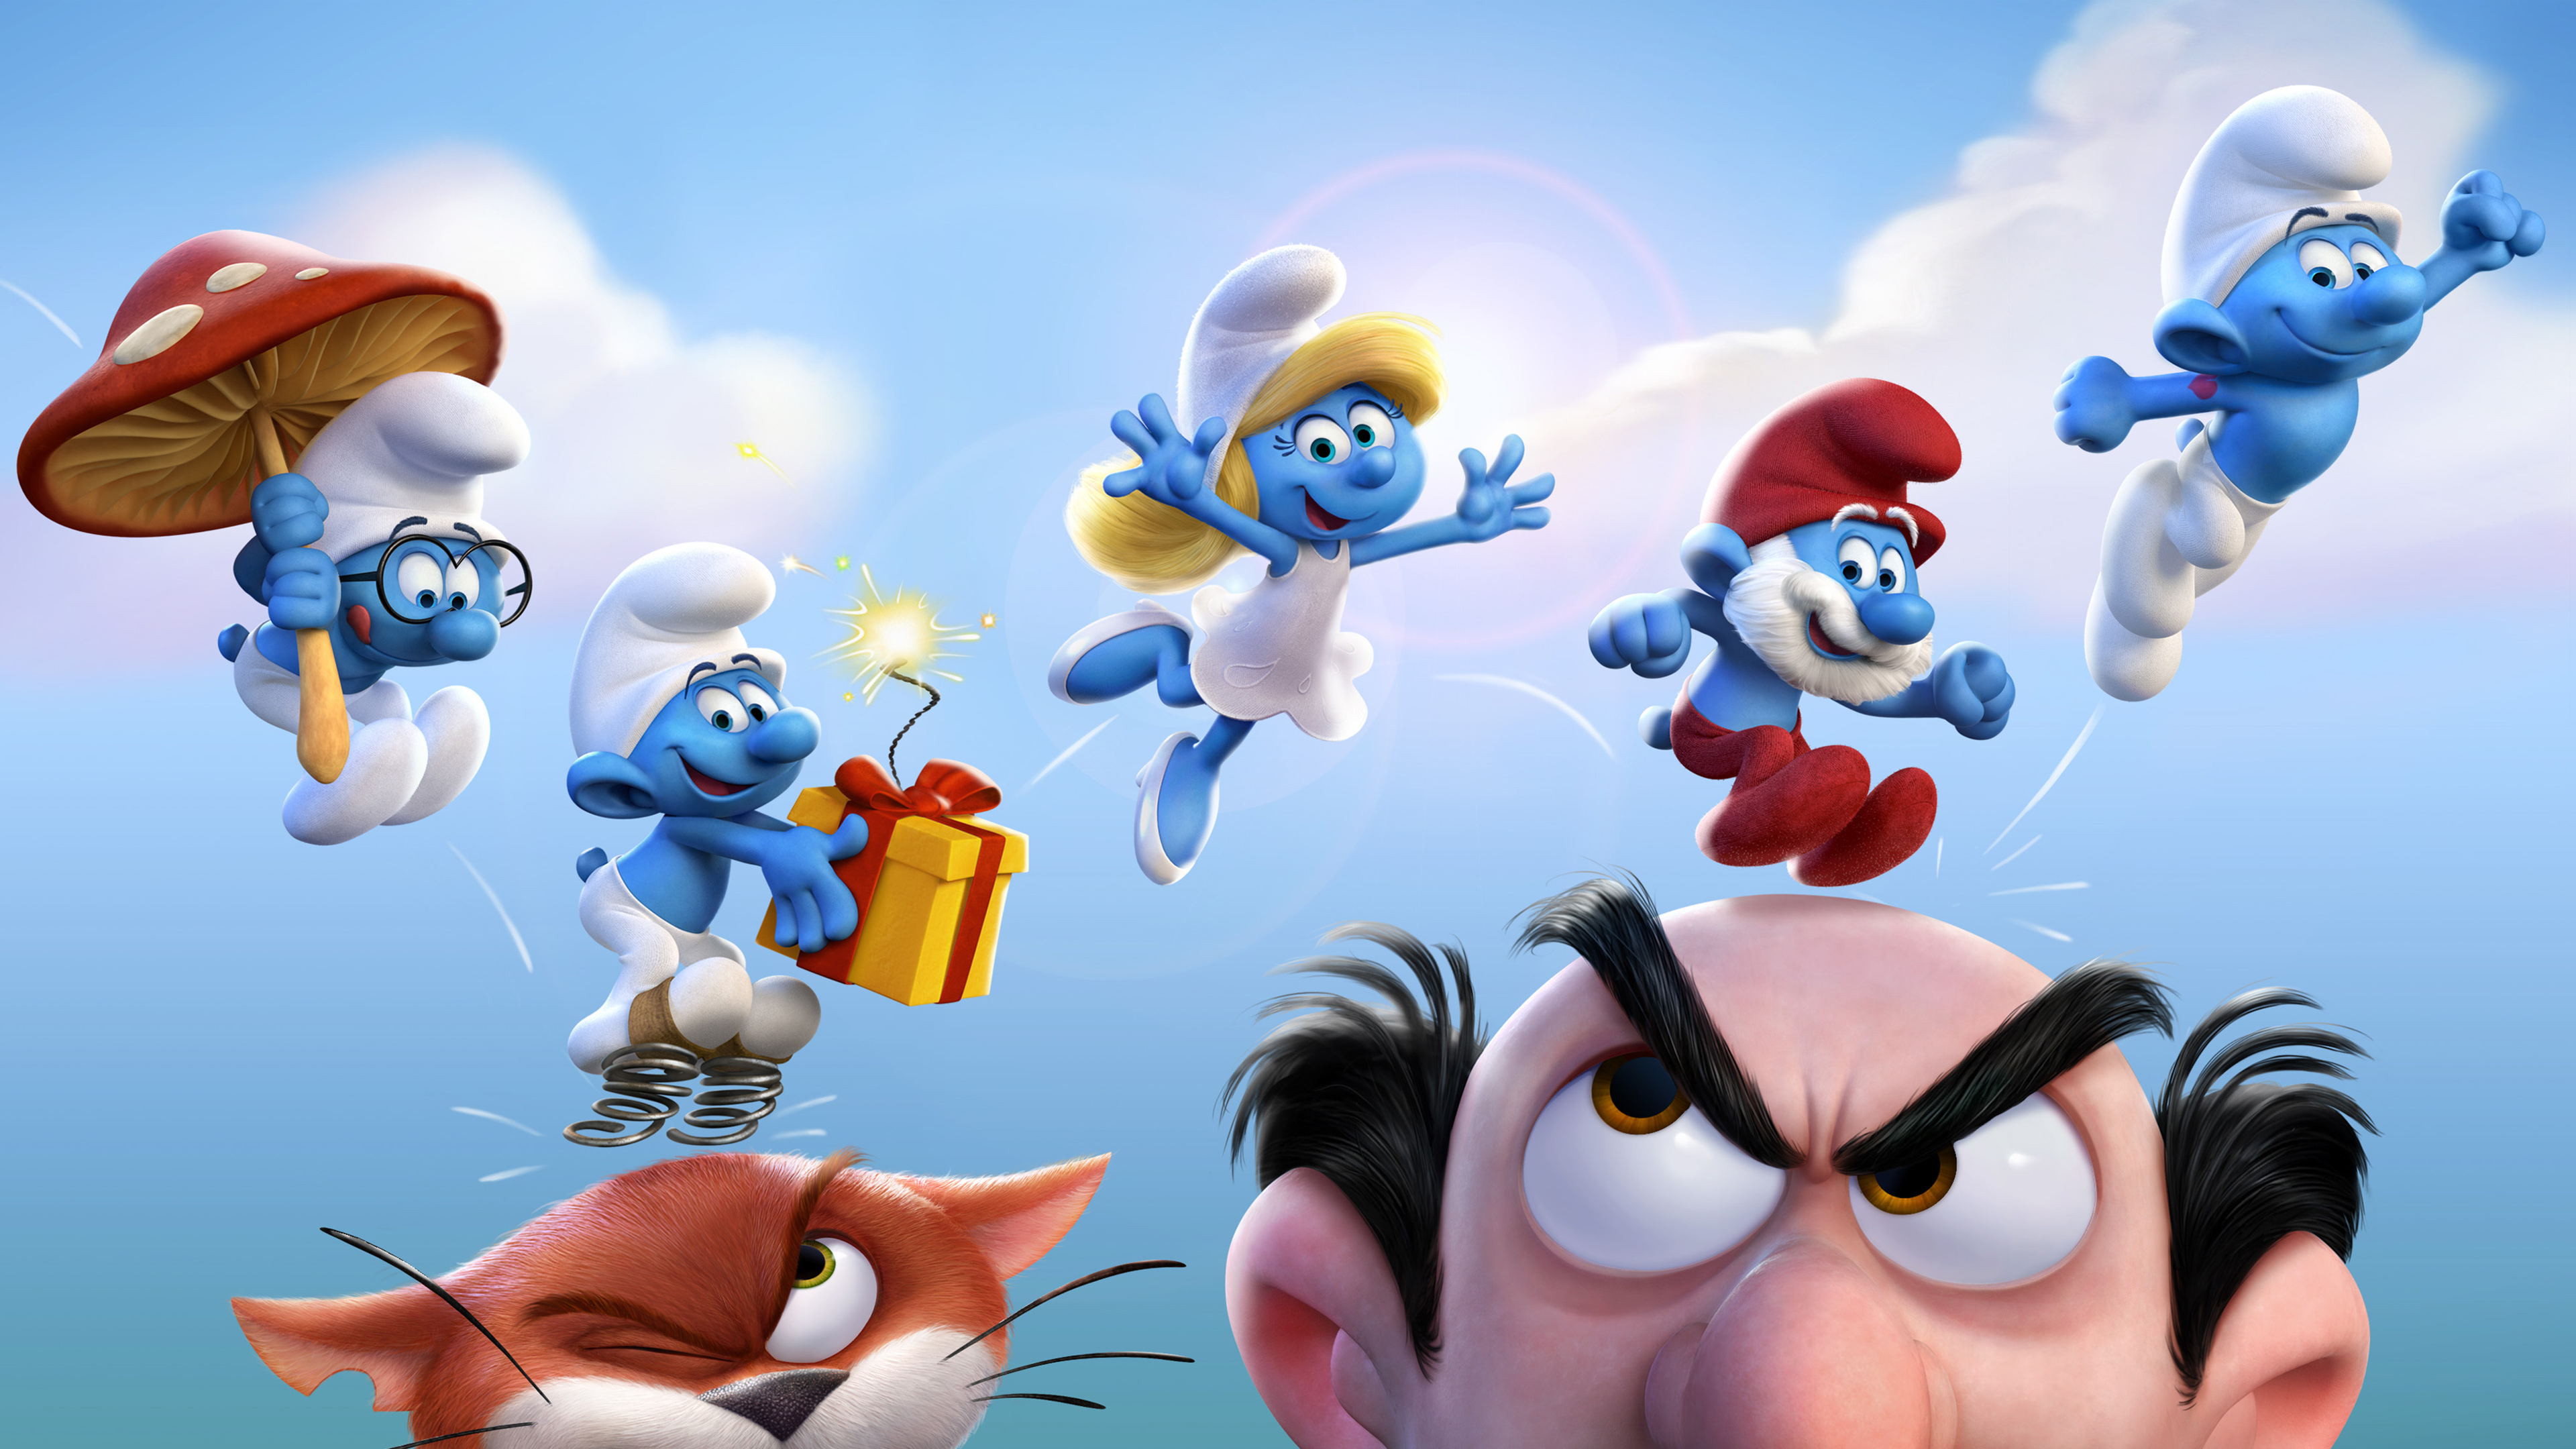 Full Hd Quality Px Laptop Smurfs Wallpapers - Smurfs Wallpapers Hd - HD Wallpaper 